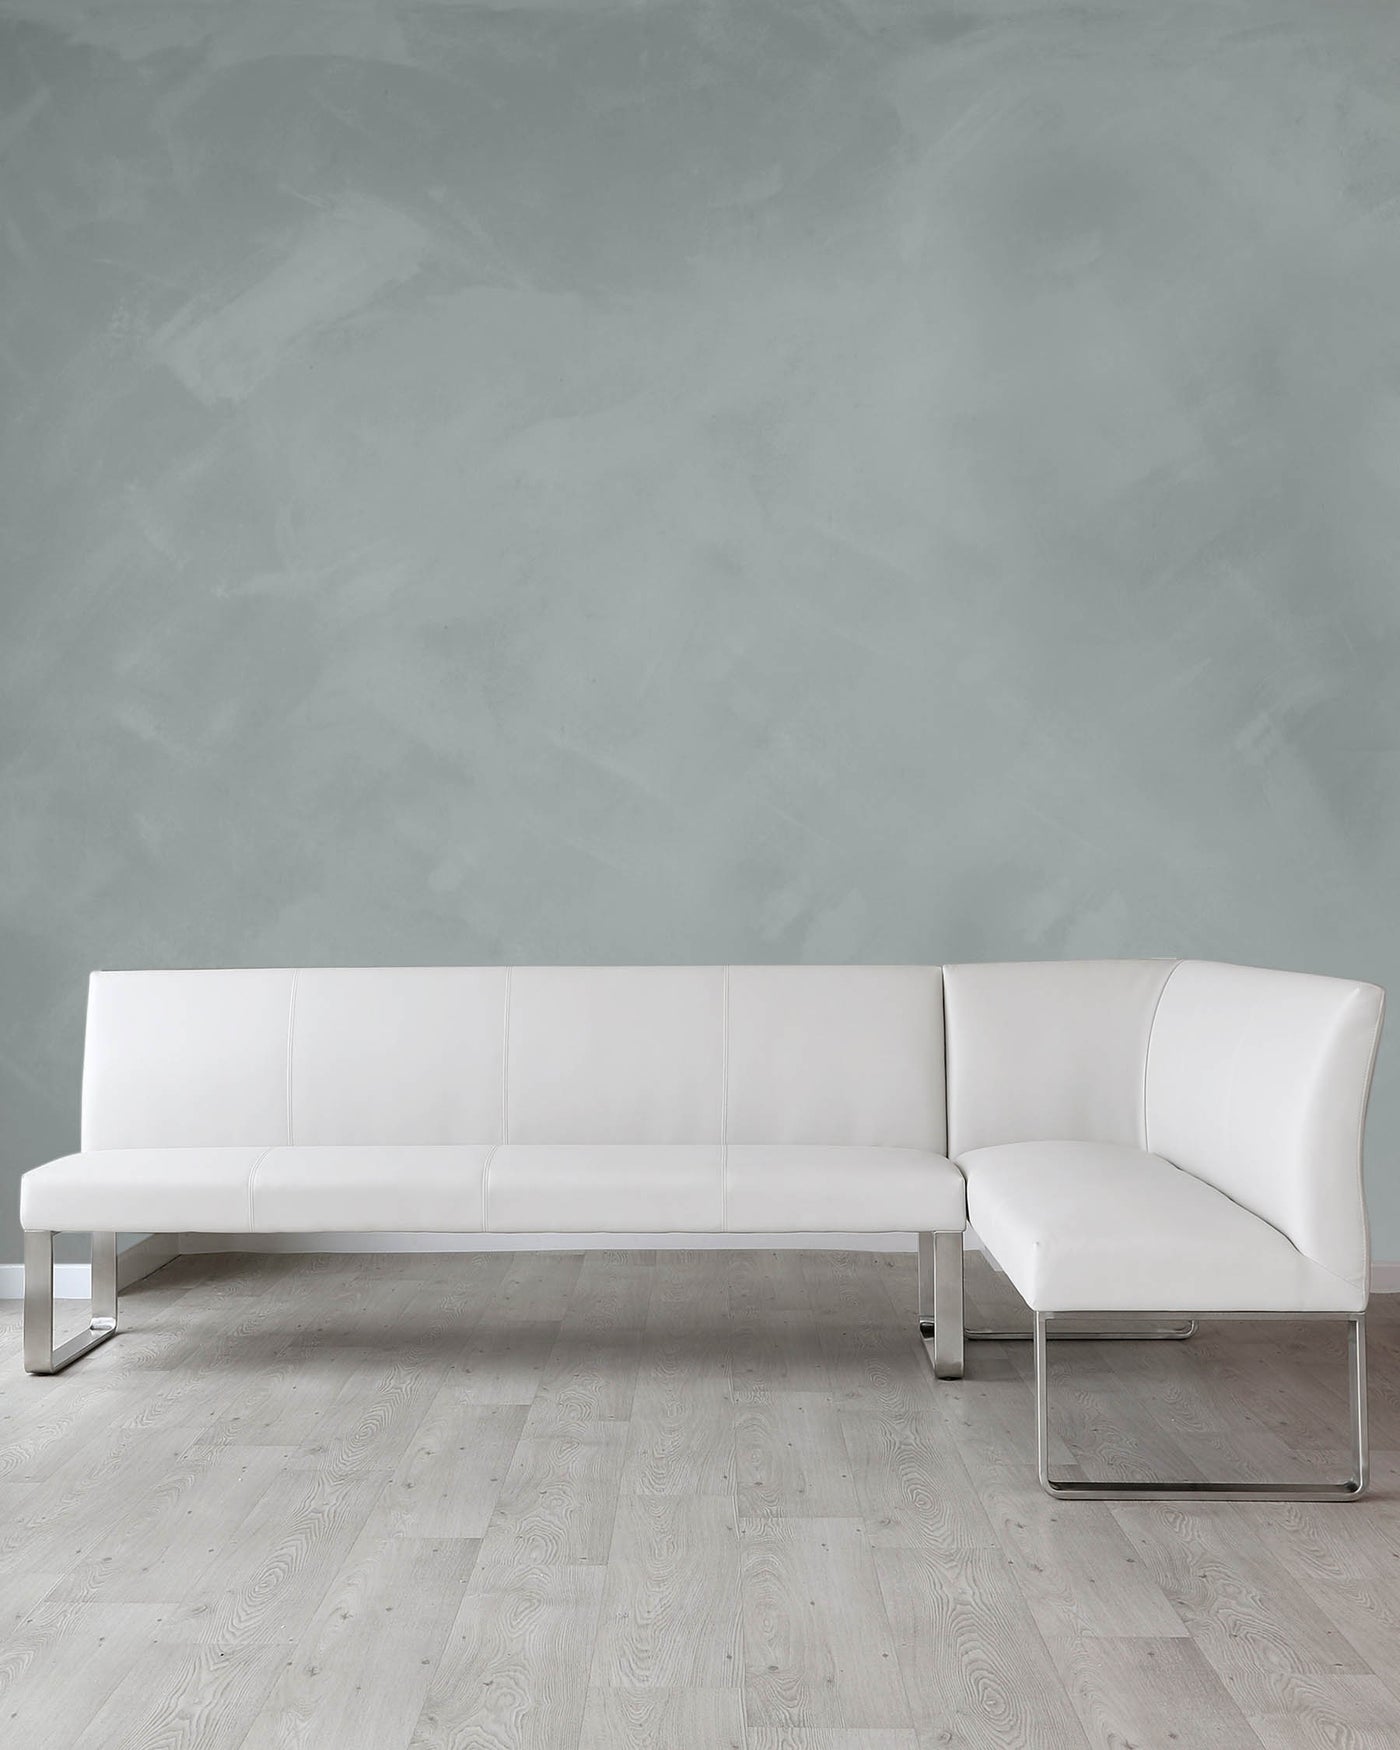 Modern white leather sectional sofa with a minimalist design, featuring clean lines, cushioned seating, and sleek metal legs, set against a textured grey wall and light wooden flooring.